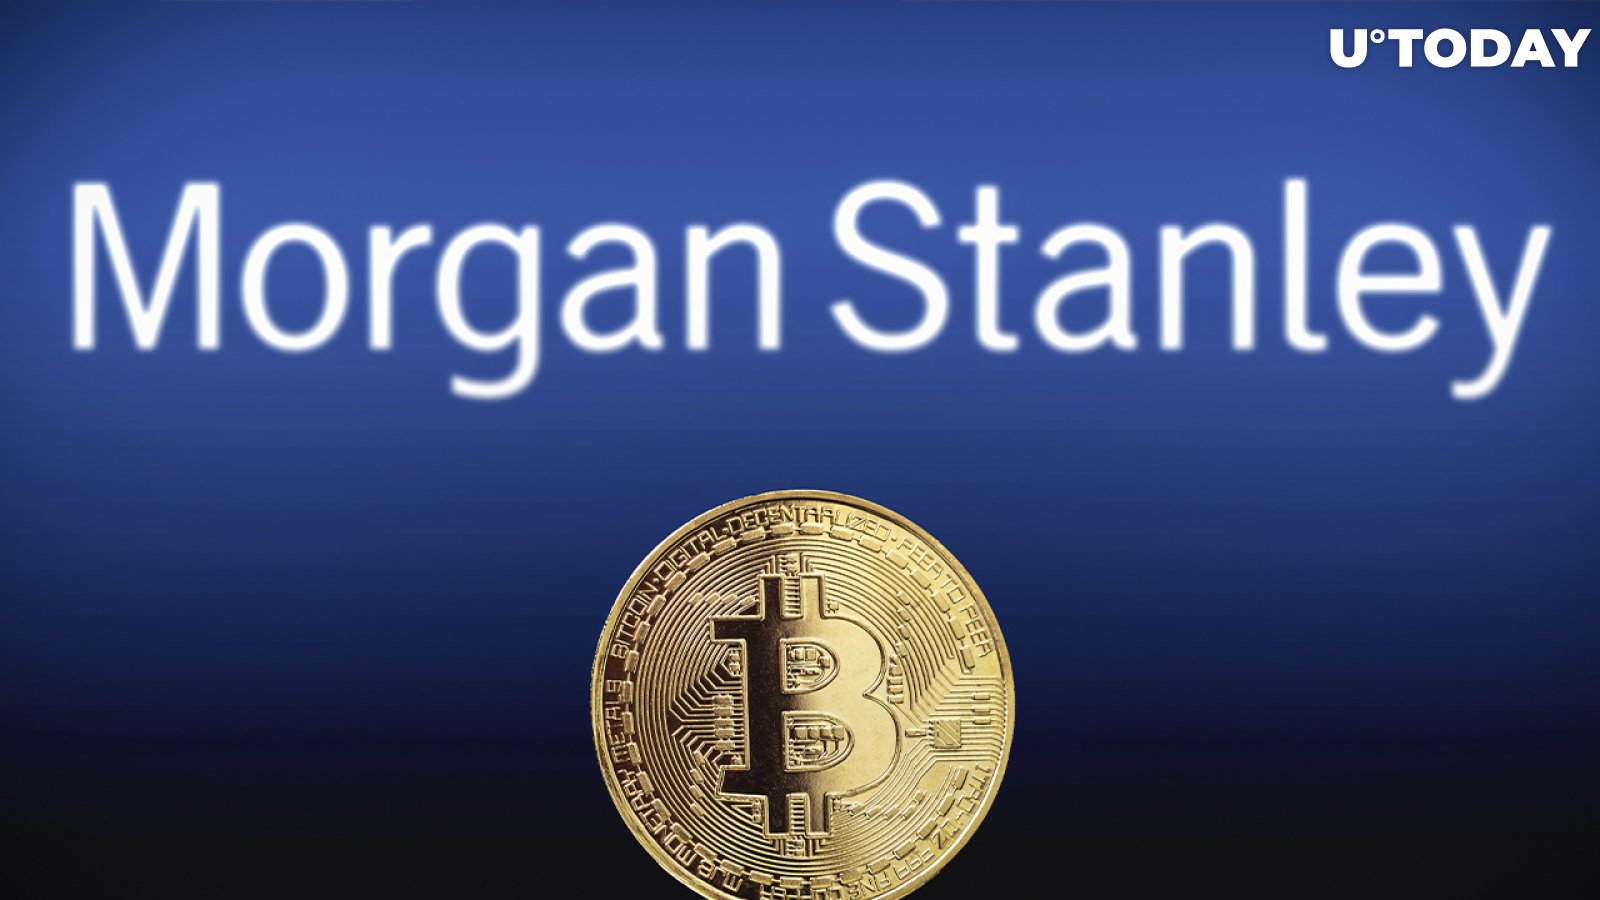 Morgan Stanley Plans on Purchasing More Bitcoin in 2022, Data Analysis